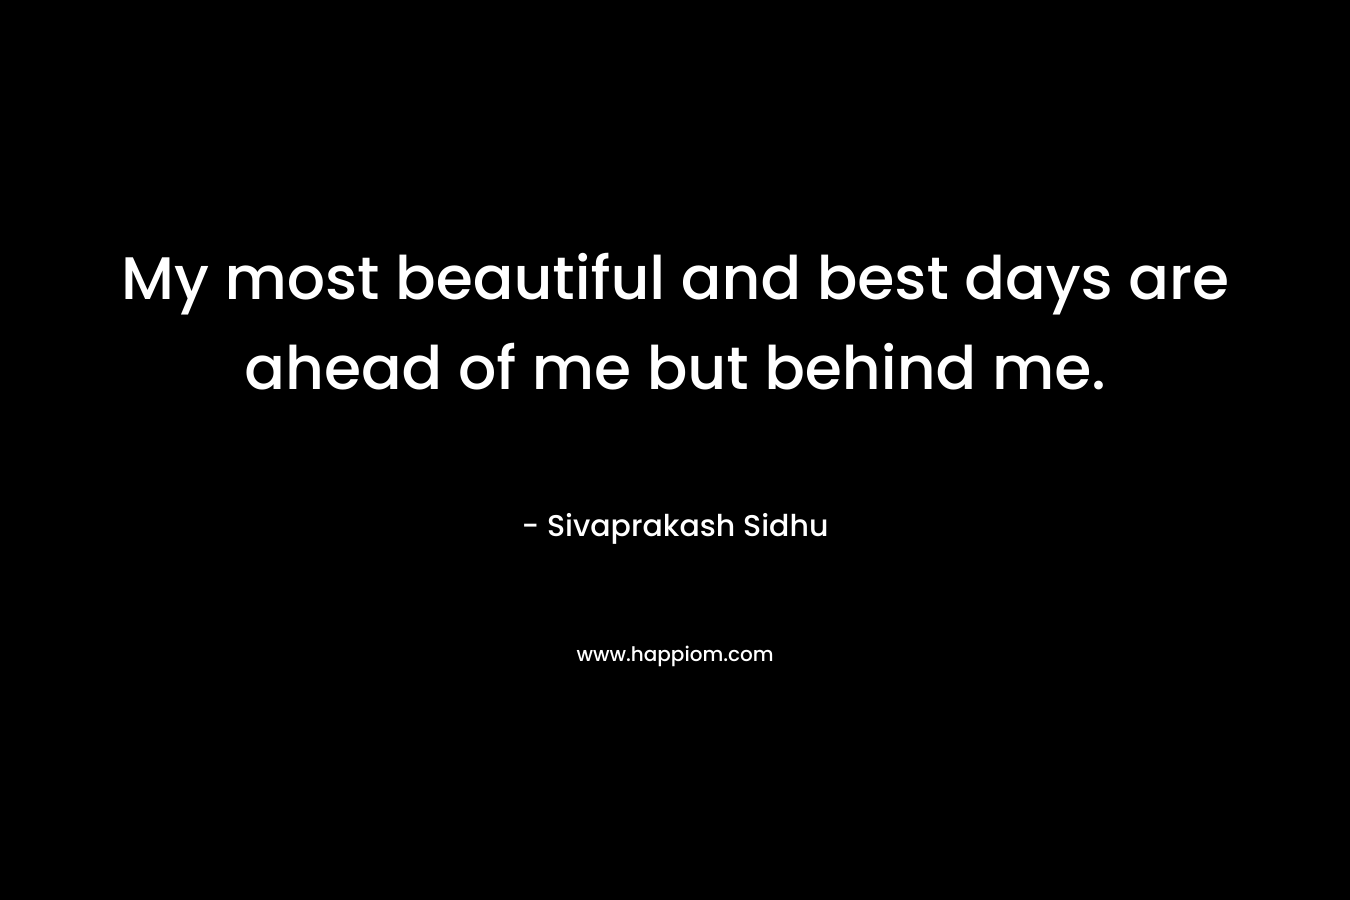 My most beautiful and best days are ahead of me but behind me.